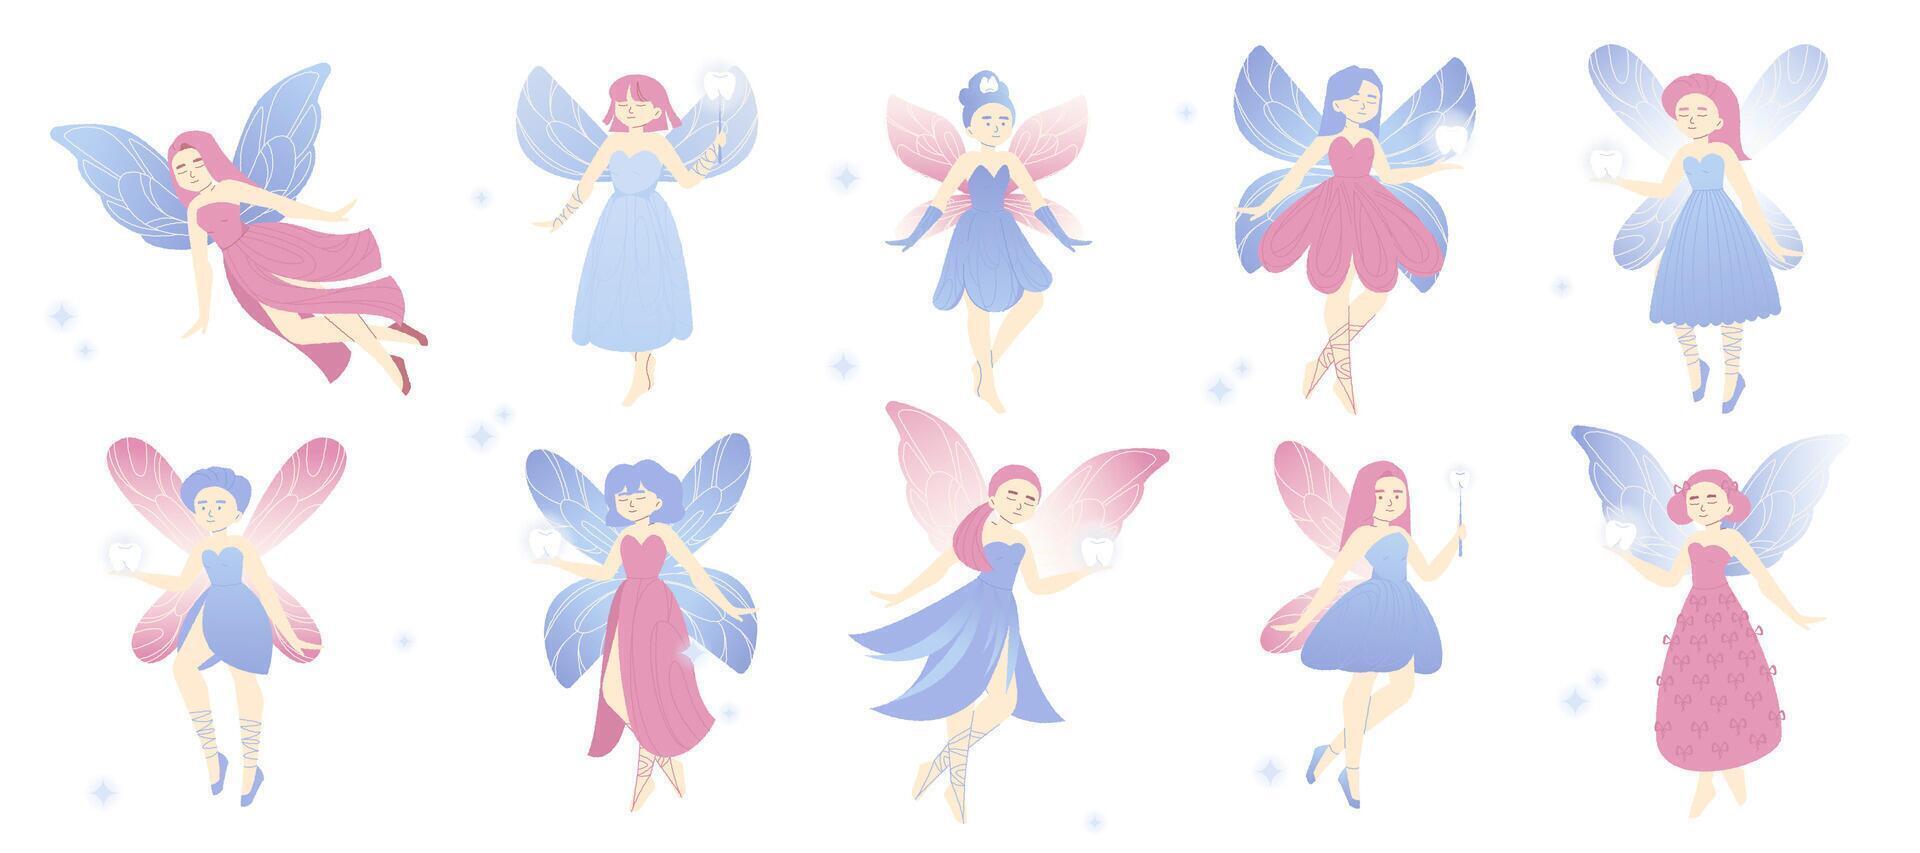 Cute tooth fairy. Cartoon girl with wings and magic wand, fairy tale character with tooth, oral health care for kids. Vector flat illustration